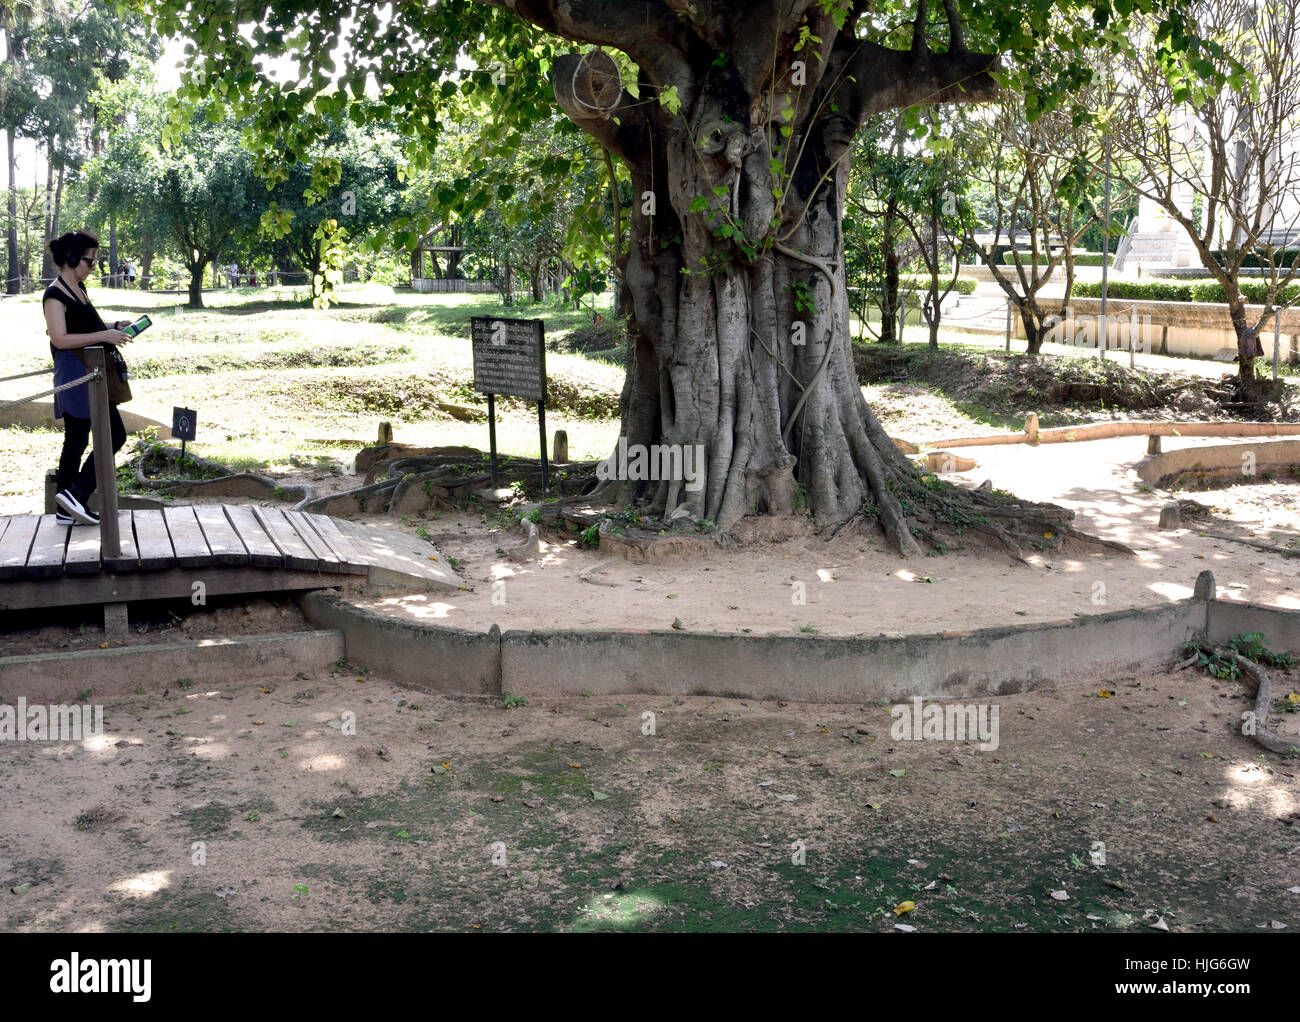 Magic Tree - Memorial Site - The Killing Fields - Choeung Ek Museum of Cambodia  ( Mass grave of victims by Pol Pot - Khmer Rouge  from 1963 - 1997. ) Phnom Penh Cambodia Stock Photo